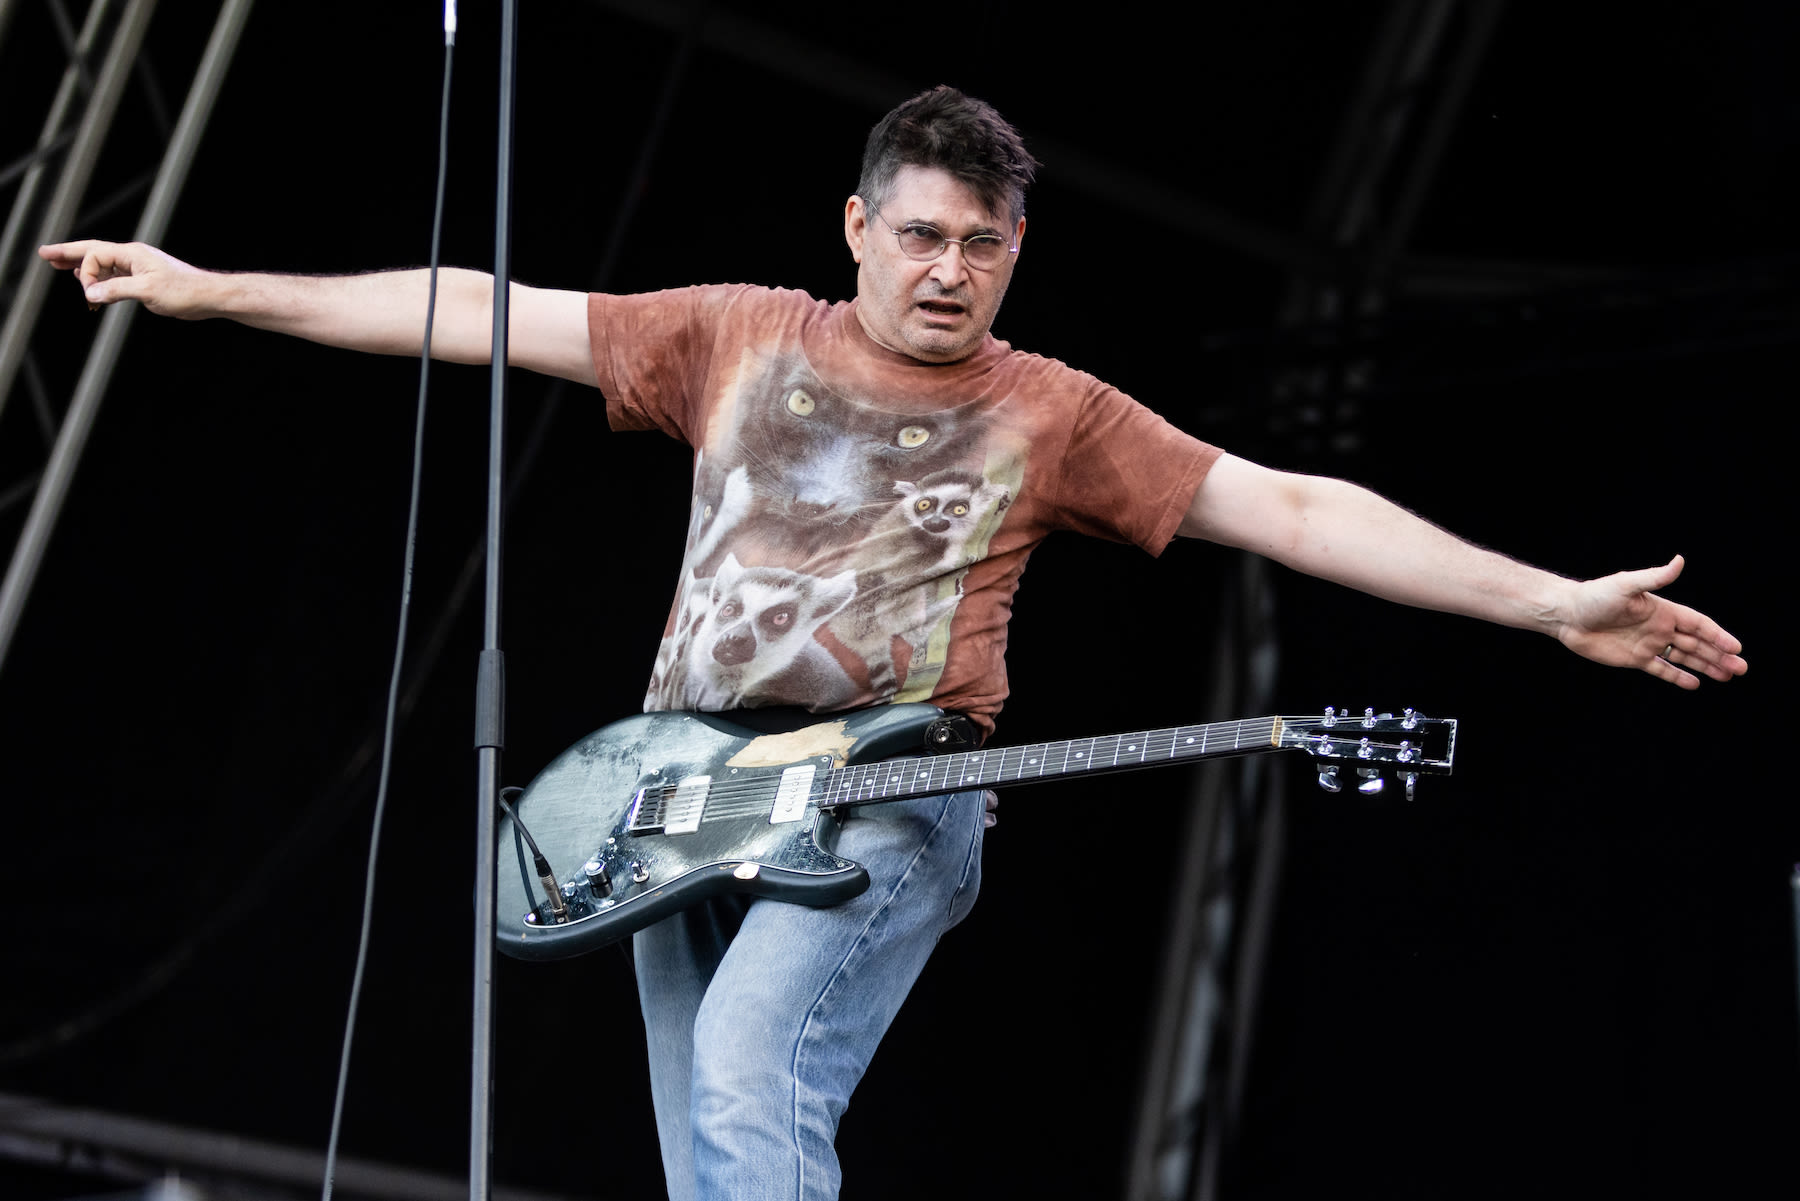 Chicago Indie Label Announces Campaign to Honor Steve Albini on Late Producer’s Birthday